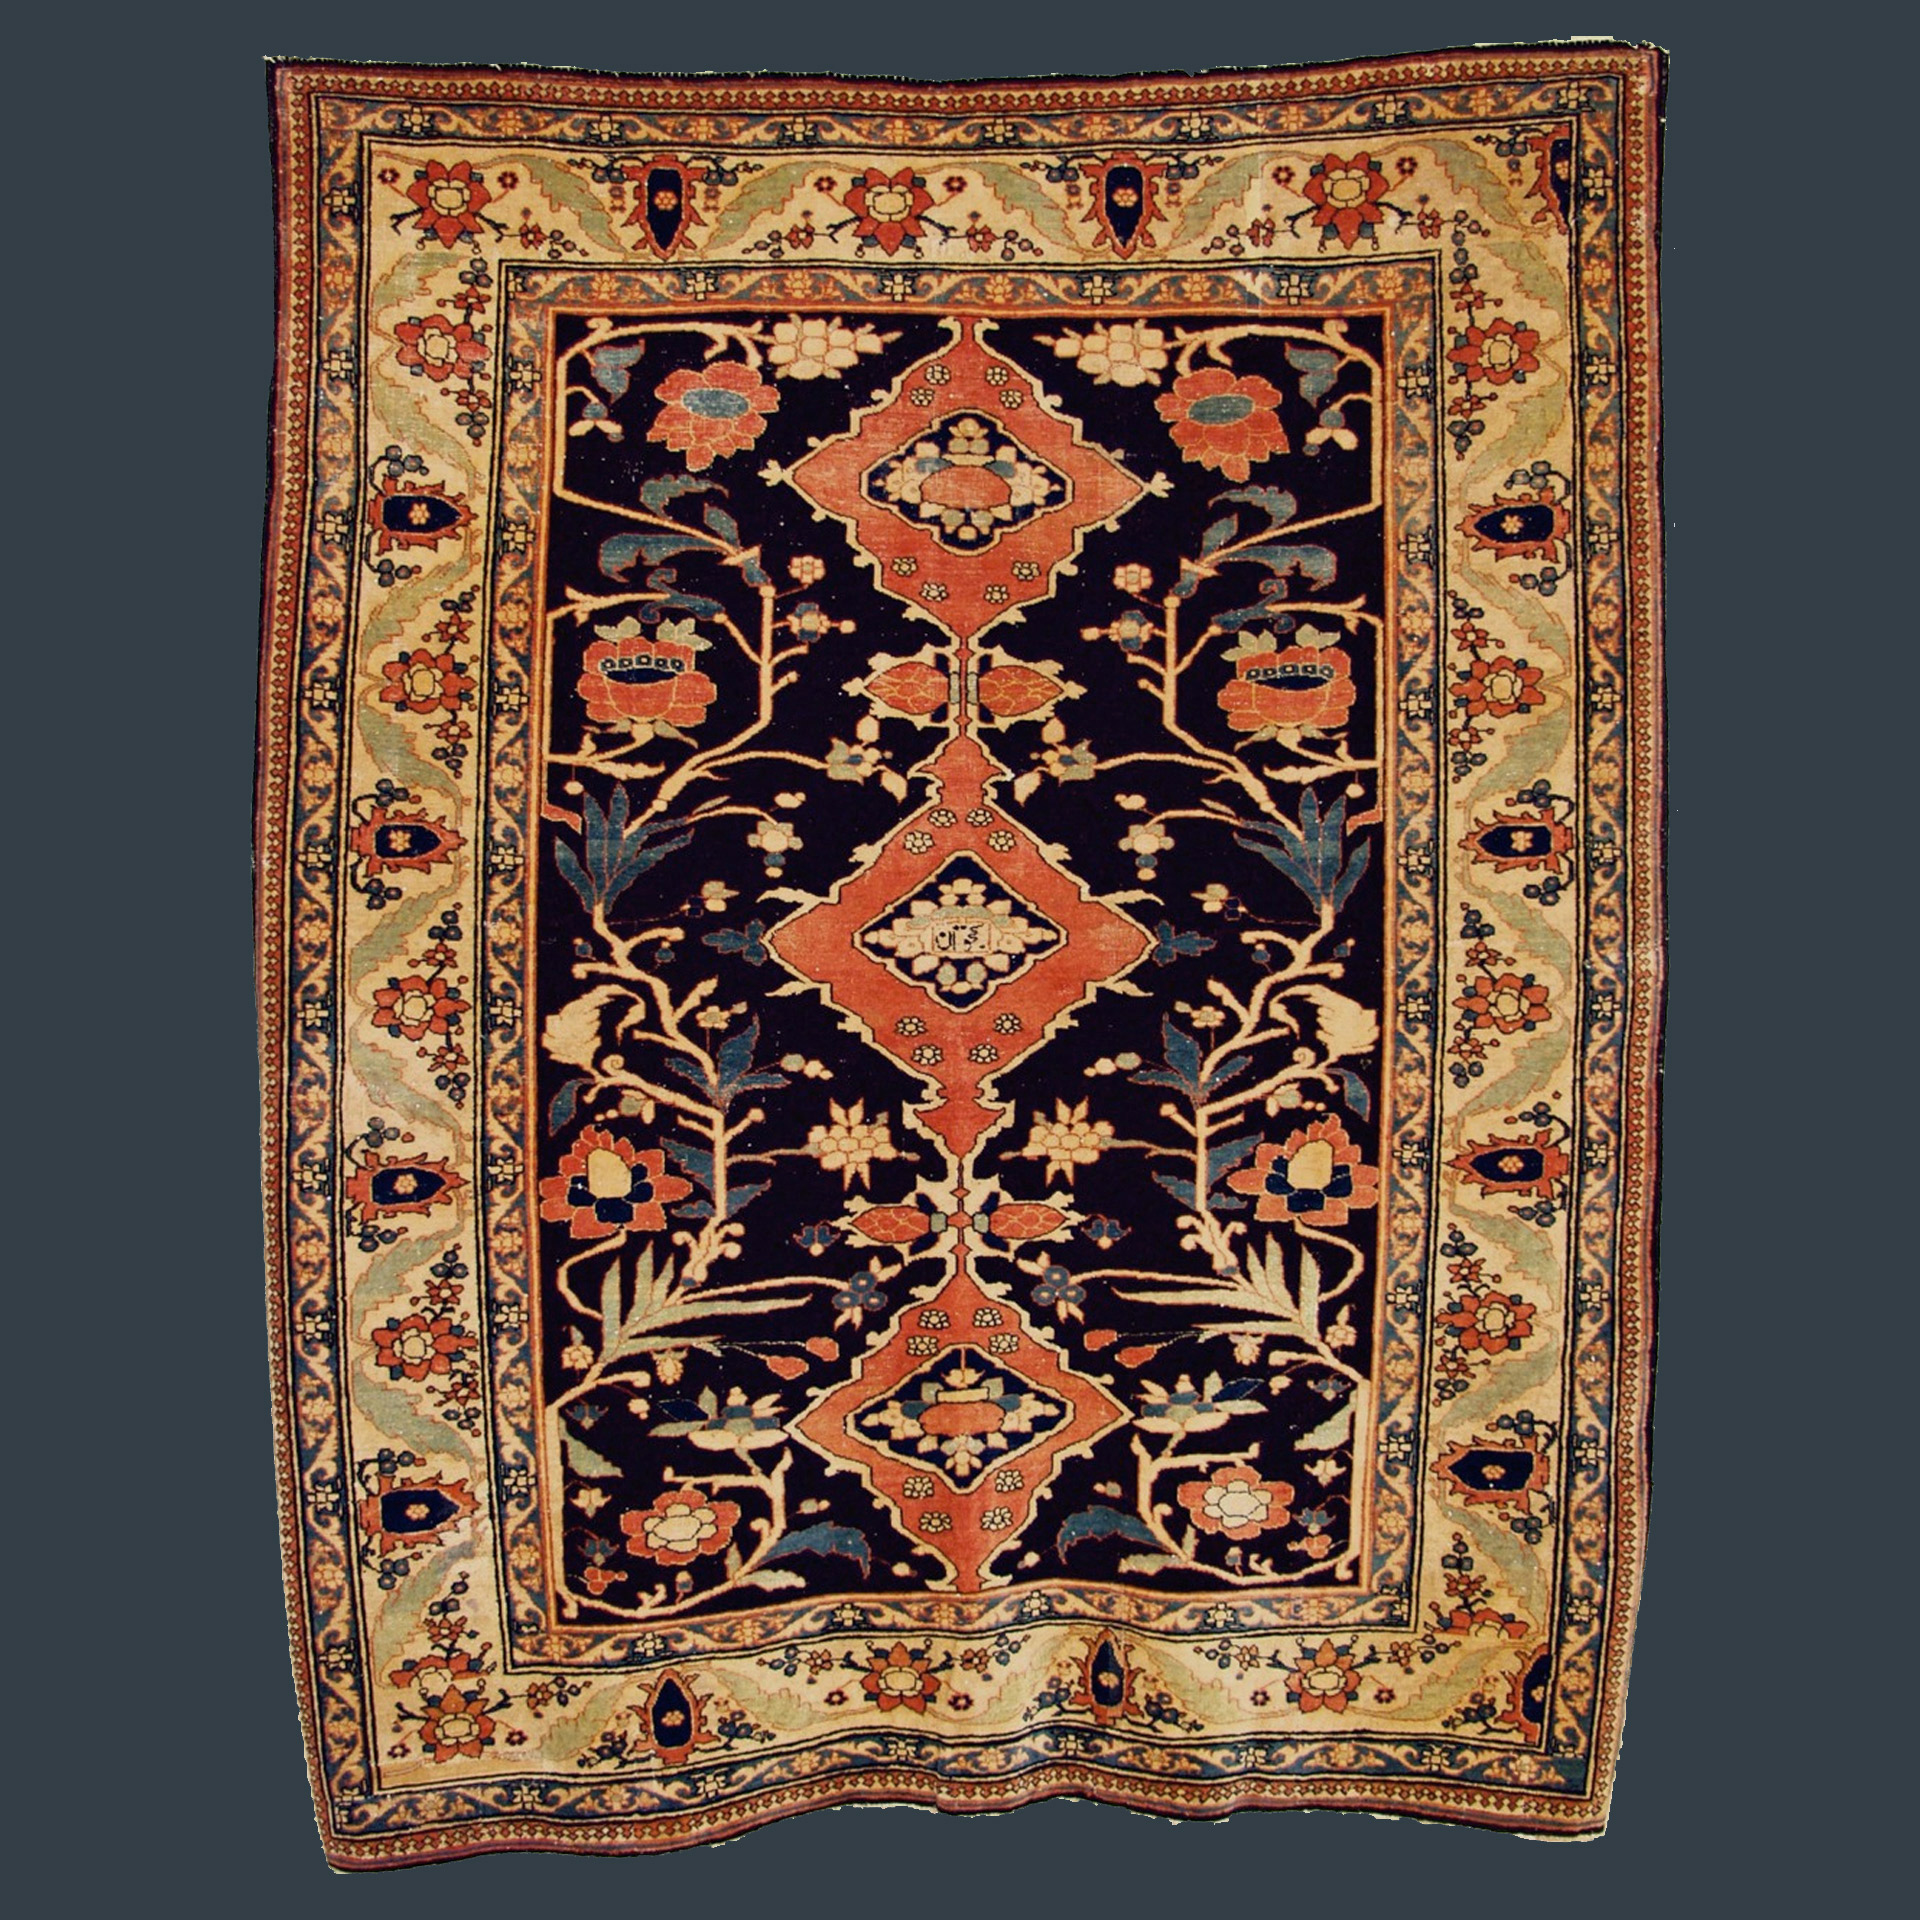 A 19th century antique Persian Tabriz rug with three medallions on a navy blue field, circa 1880 - Douglas Stock Gallery Antique Rug Research Archives